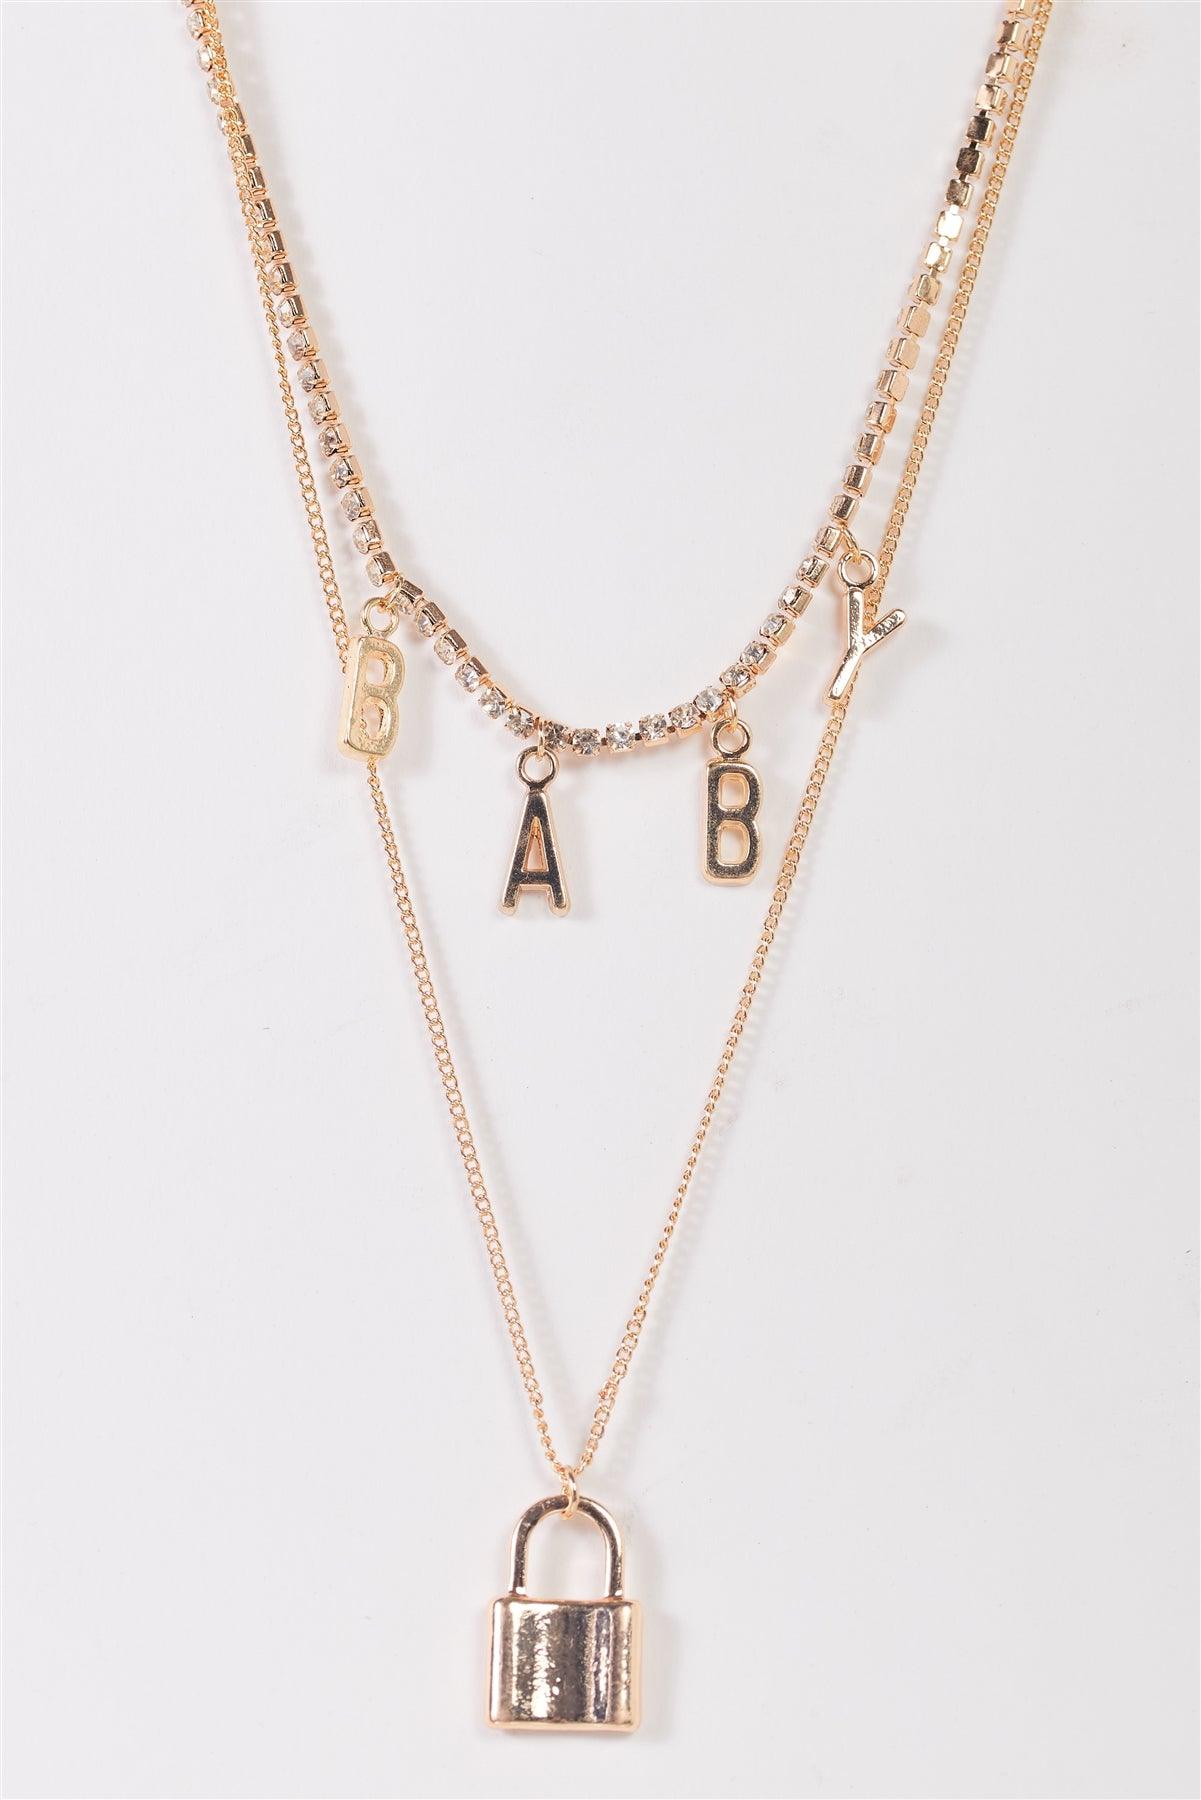 Gold Thin Chain With Padlock Pendant & Tennis Rhinestone Choker With "Baby" Letters  Necklace/3 Pieces